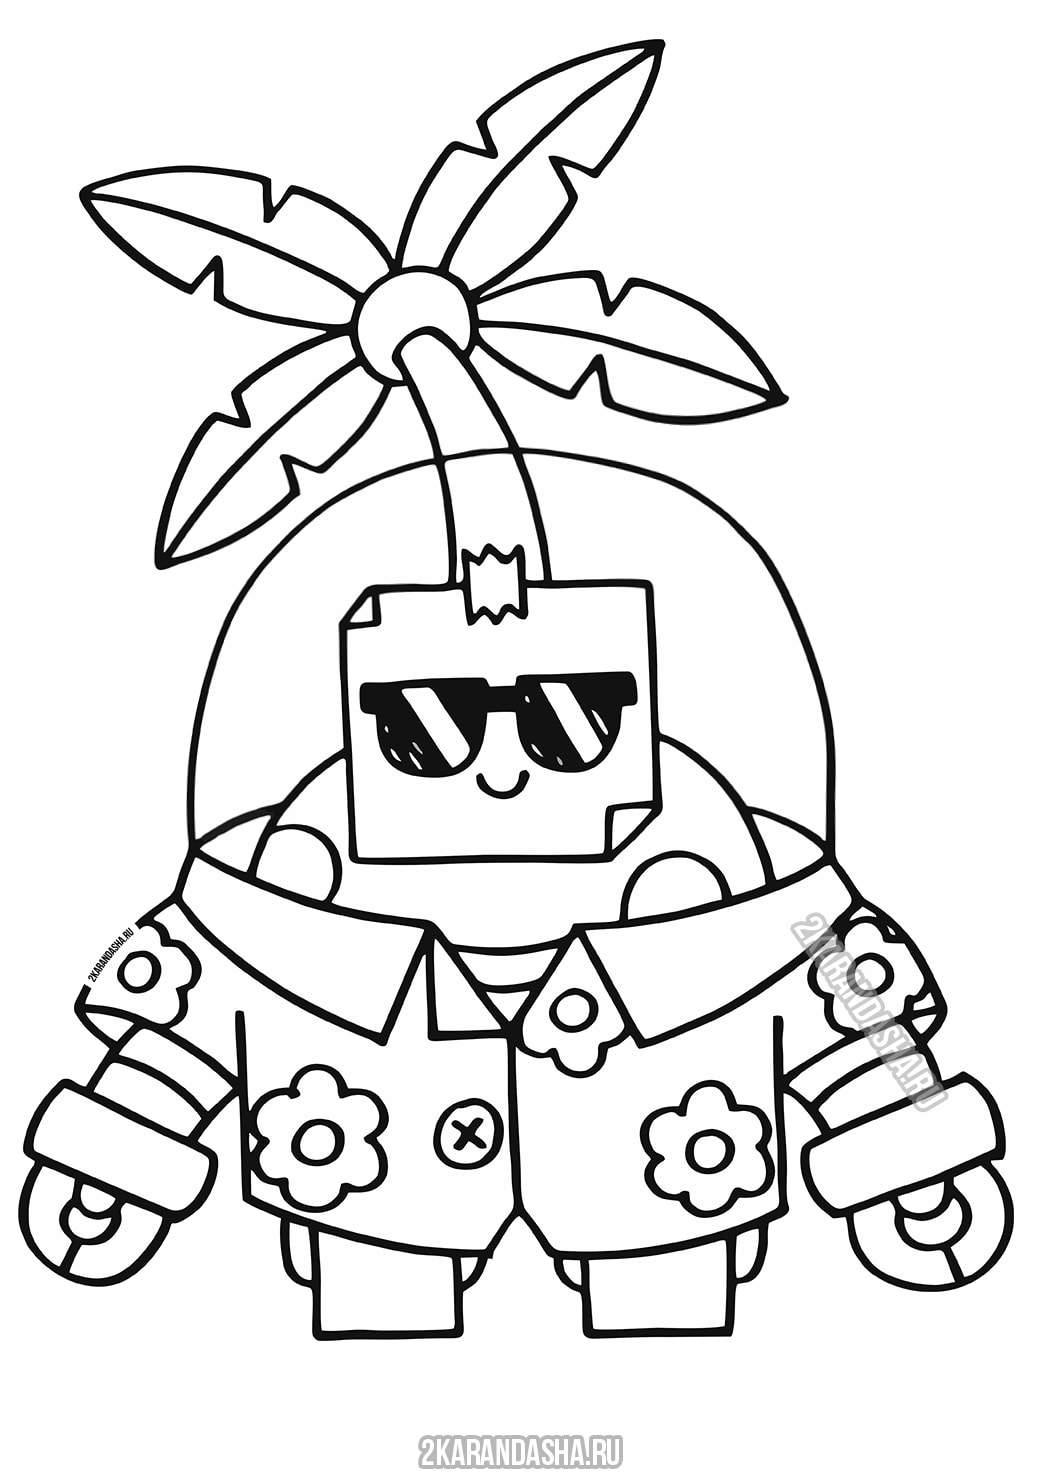 Coloring Page Brawl Stars Skin Tropical Sprout Print Brawl Stars - brawl stars coloring pages streetwear max